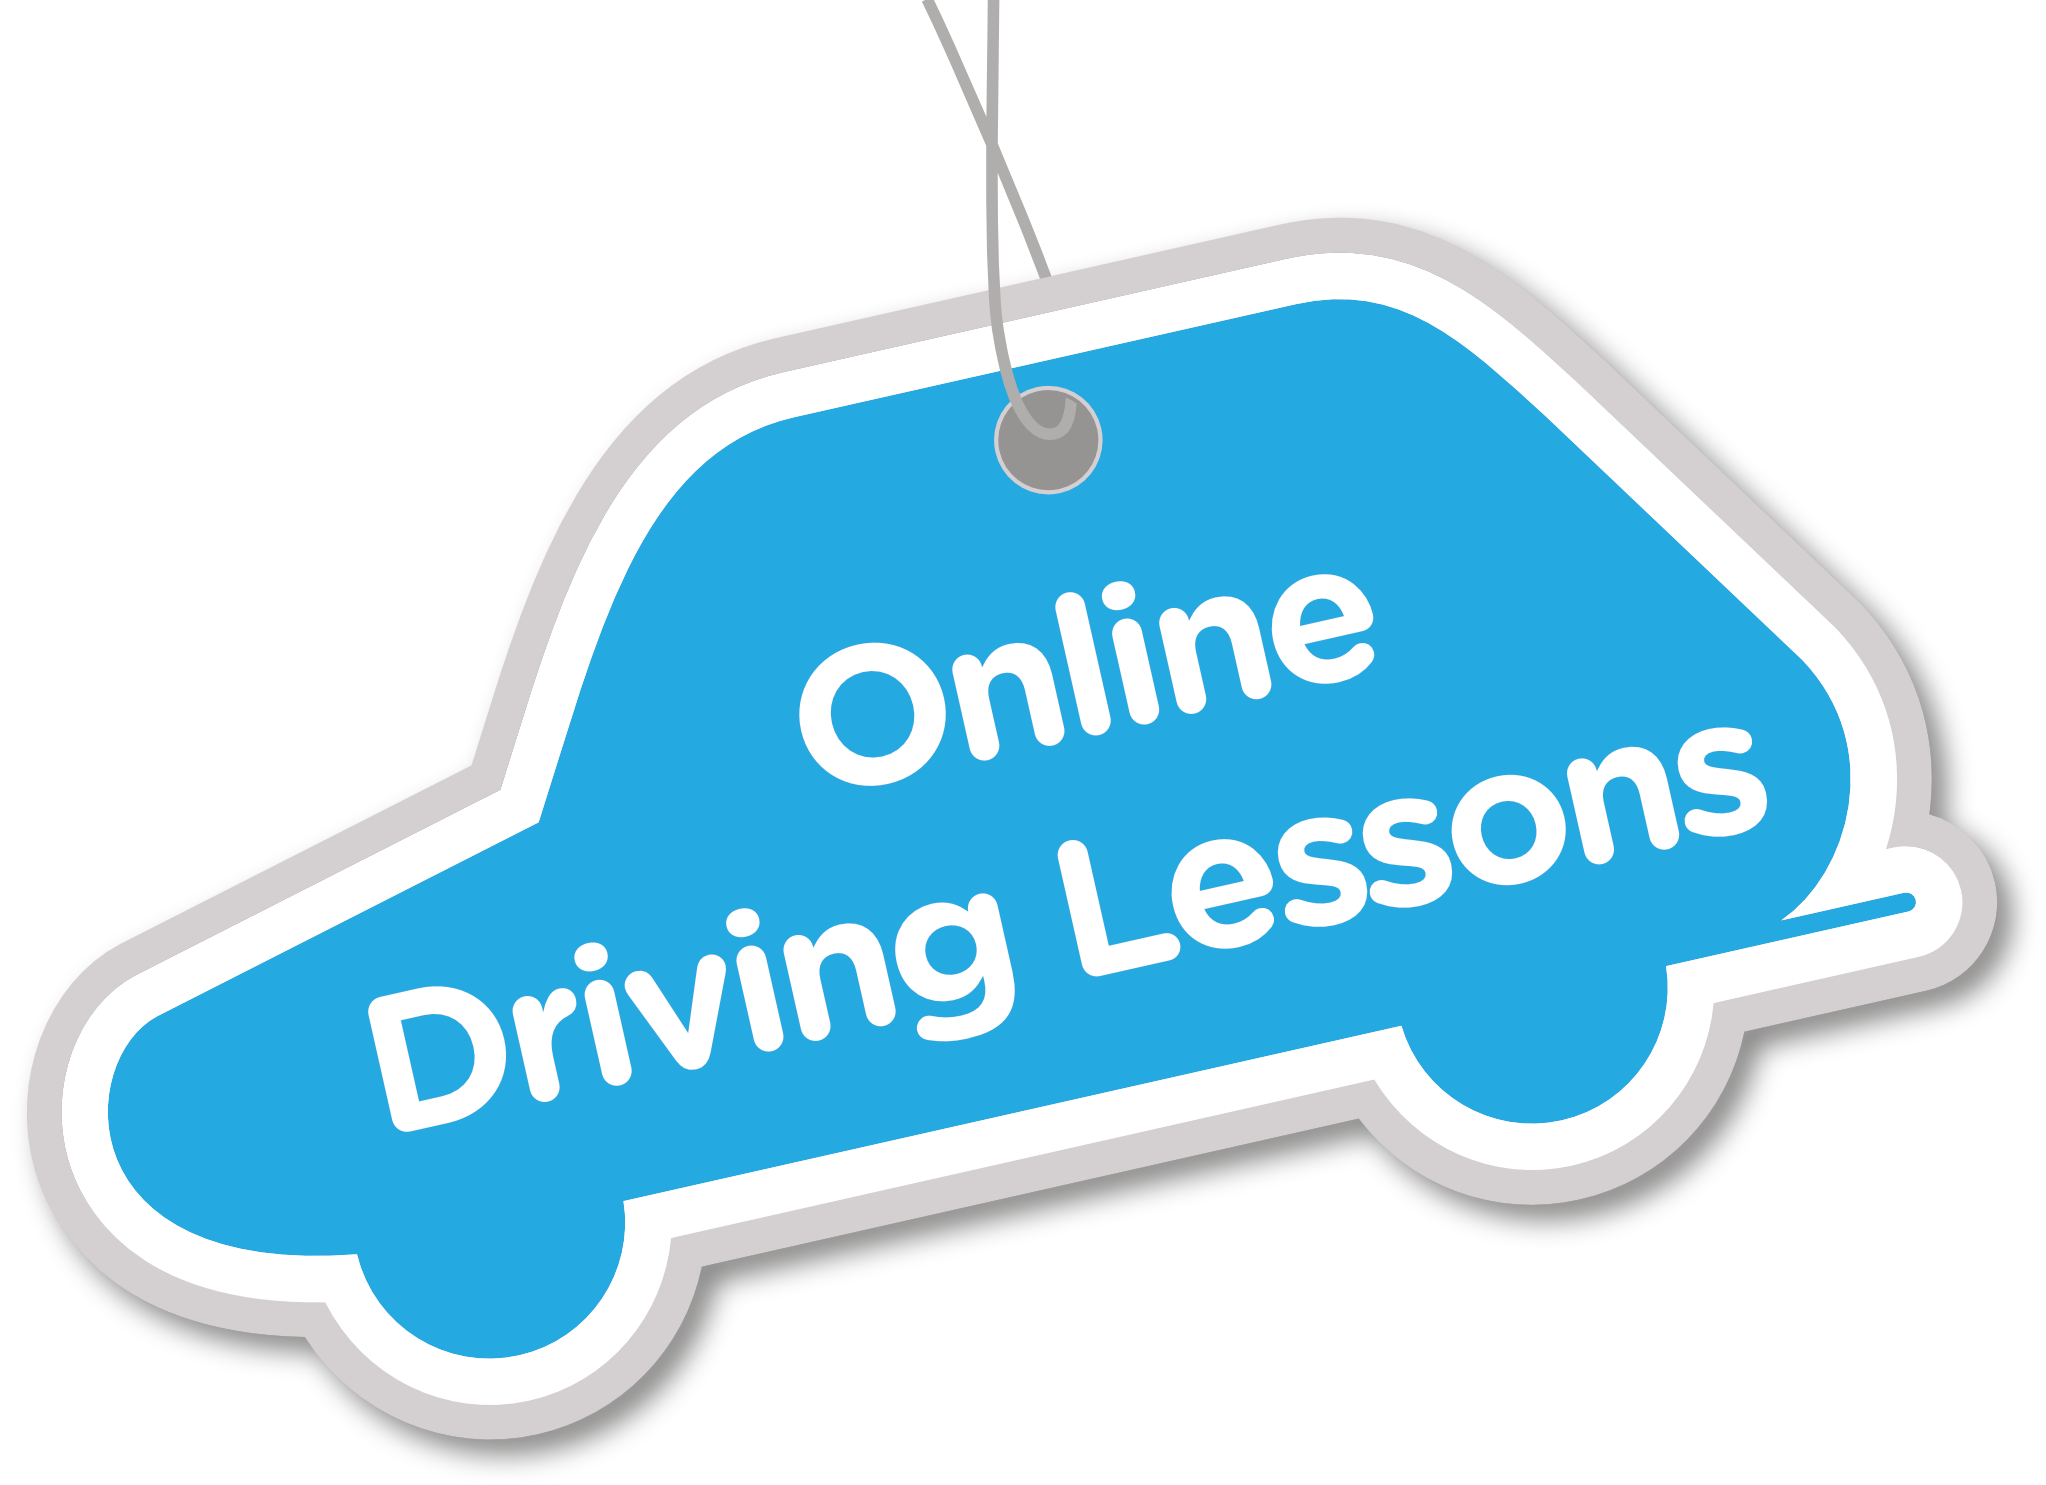 Online Driving Lessons logo.